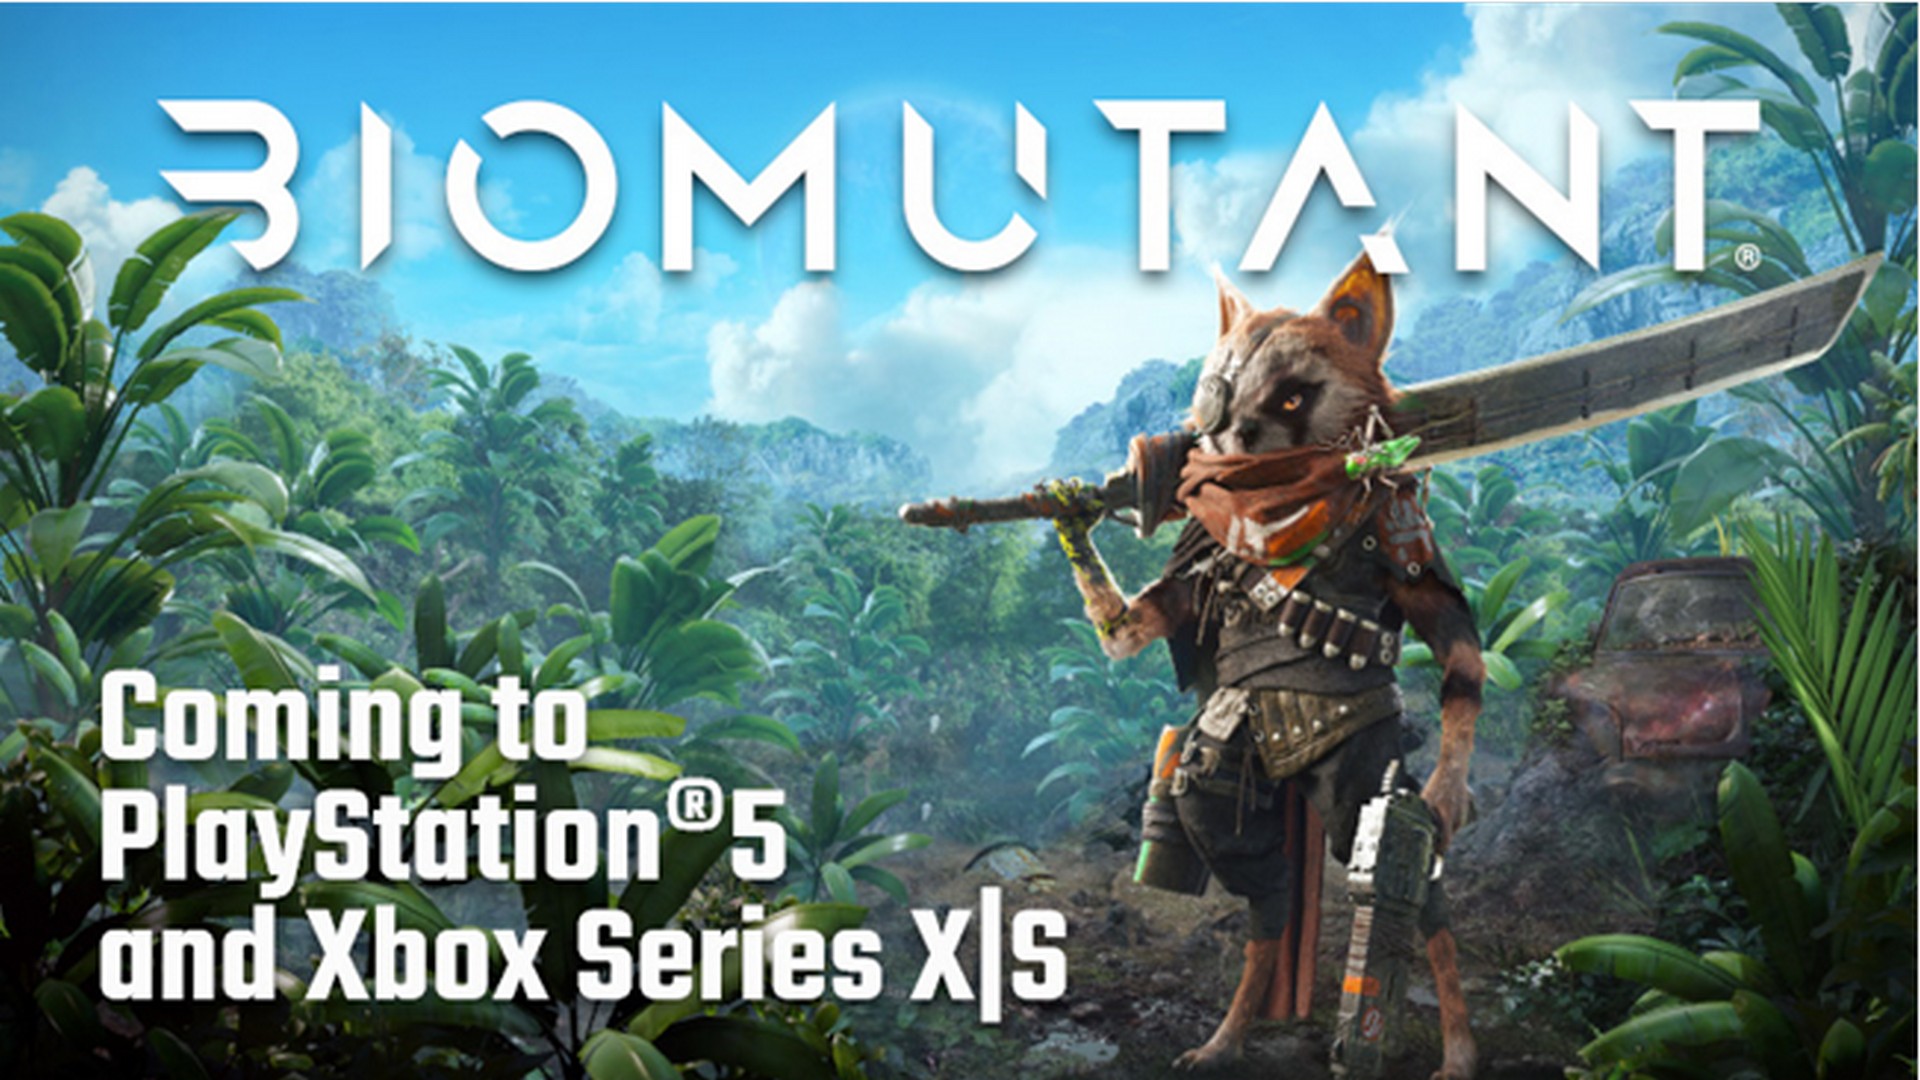 Wung-Fu Fable RPG Biomutant Launching On Playstation 5 & Xbox Series X|S On September 6th 2022 – Free Upgrade For Owners